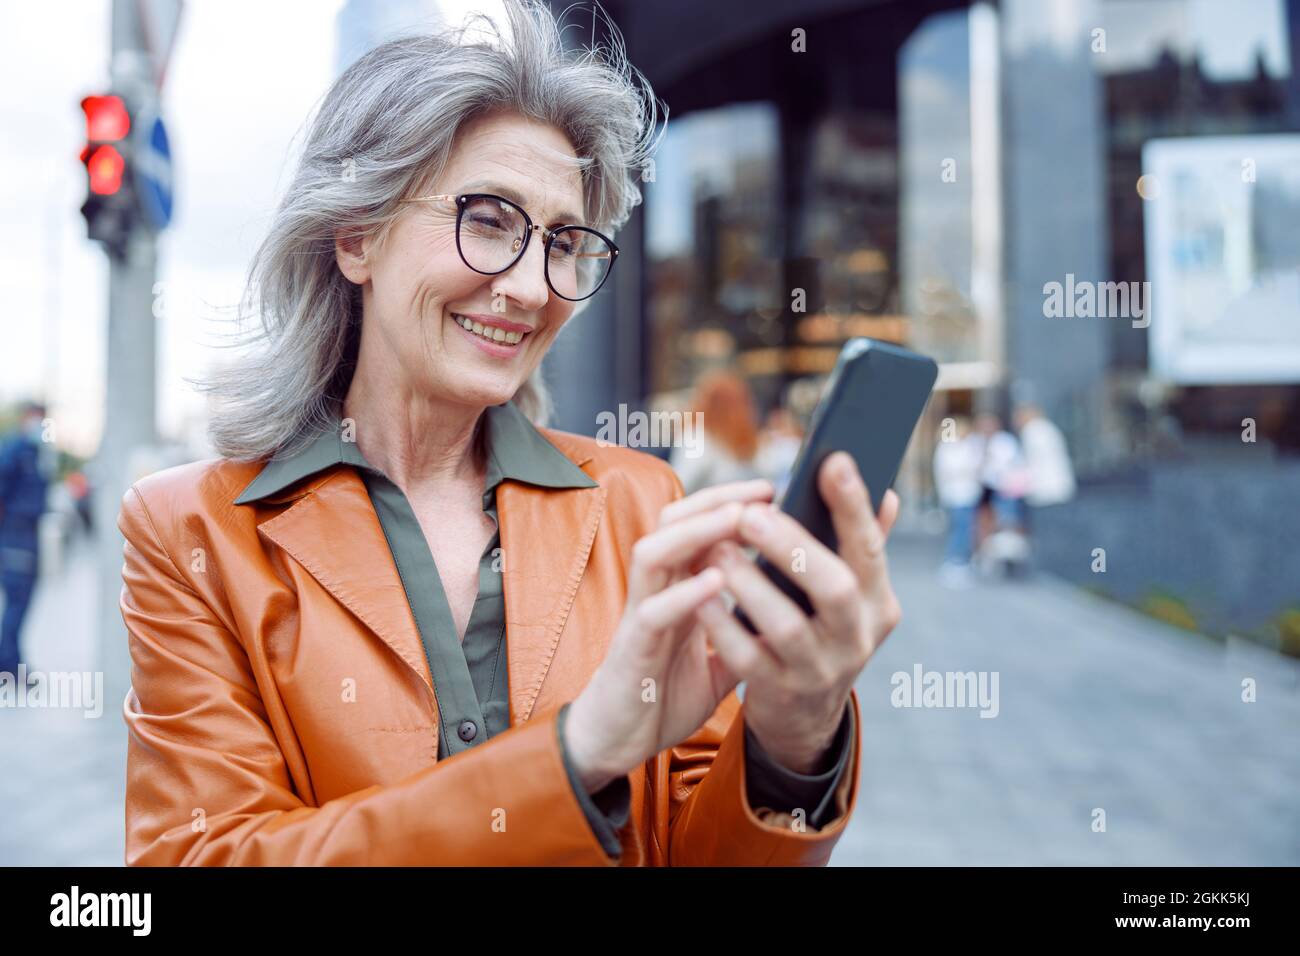 Positive mature lady with glasses uses phone standing on city street Stock Photo